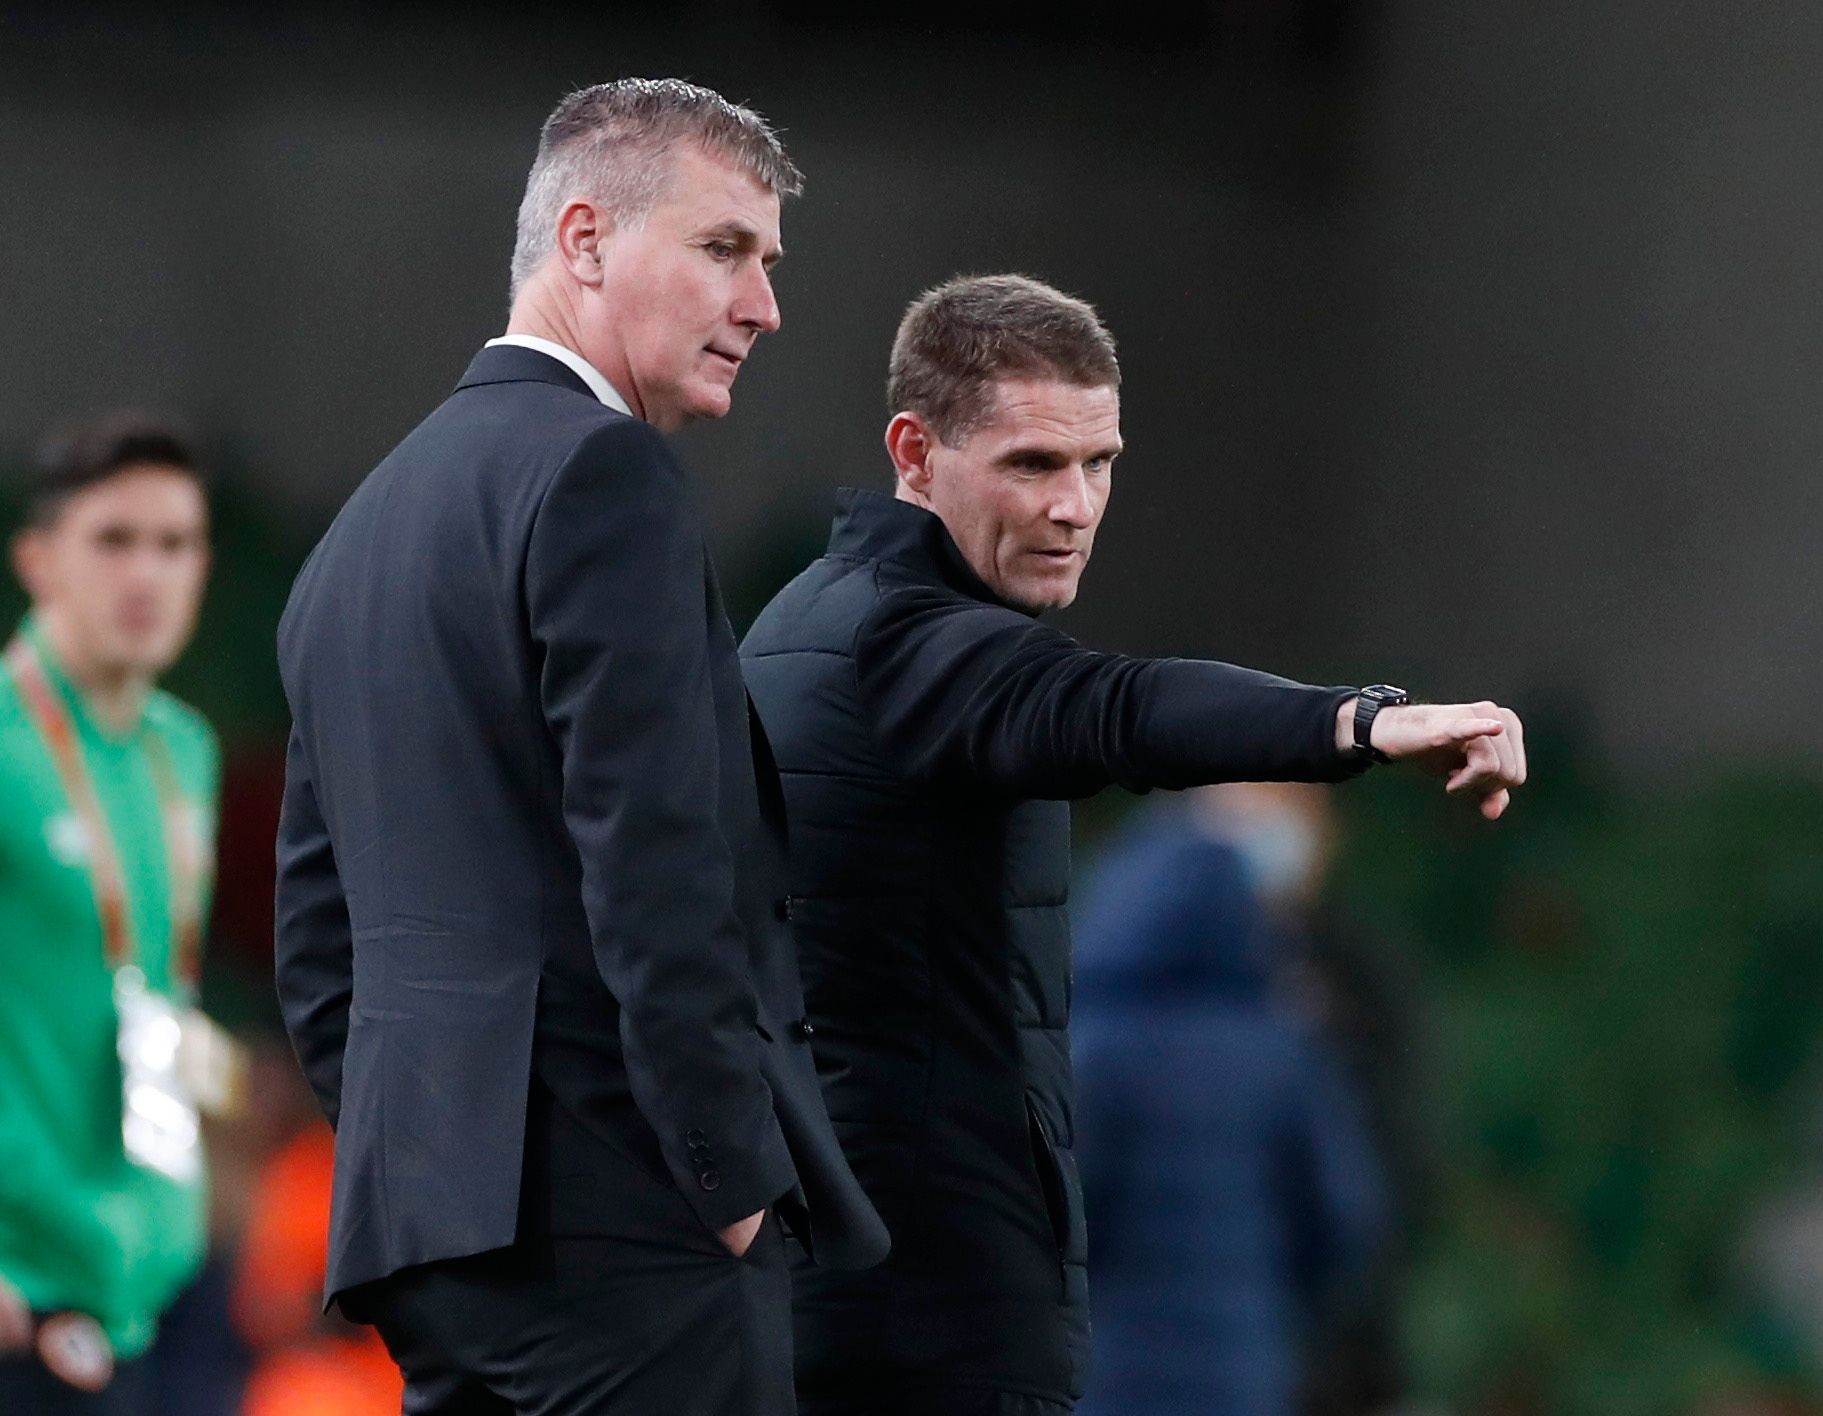 Soccer Football - World Cup - UEFA Qualifiers - Group A - Republic of Ireland v Portugal - Aviva Stadium, Dublin, Republic of Ireland - November 11, 2021  Republic of Ireland manager Stephen Kenny with assistant manager Anthony Barry before the match Action Images via Reuters/Paul Childs